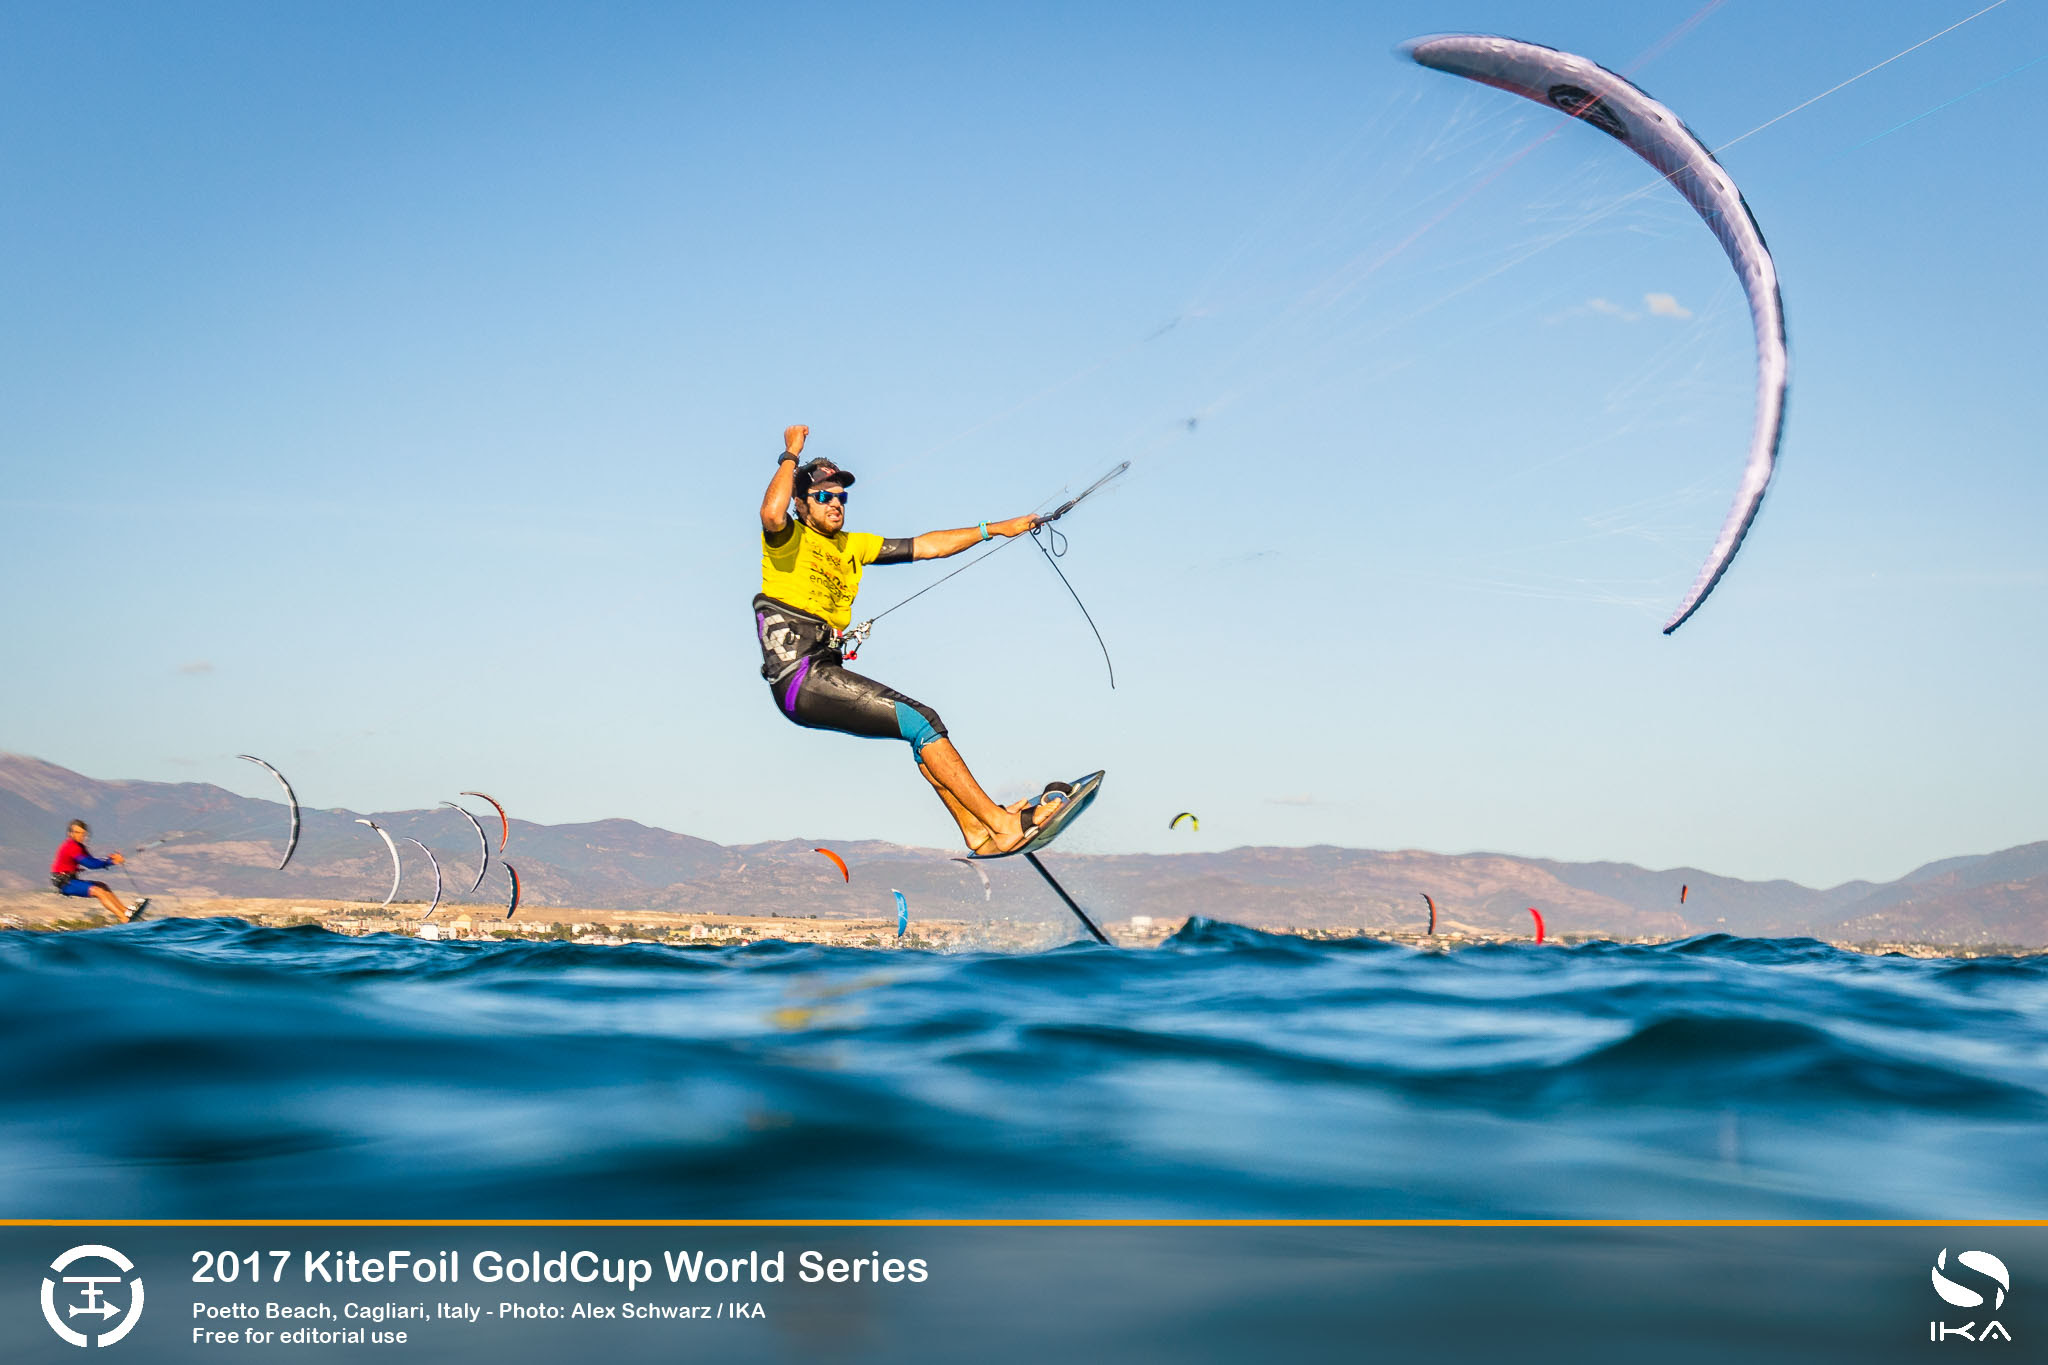 7d99e049 a599 4806 94cb c536edc3efd6 - Final day of racing at KiteFoil World Championships